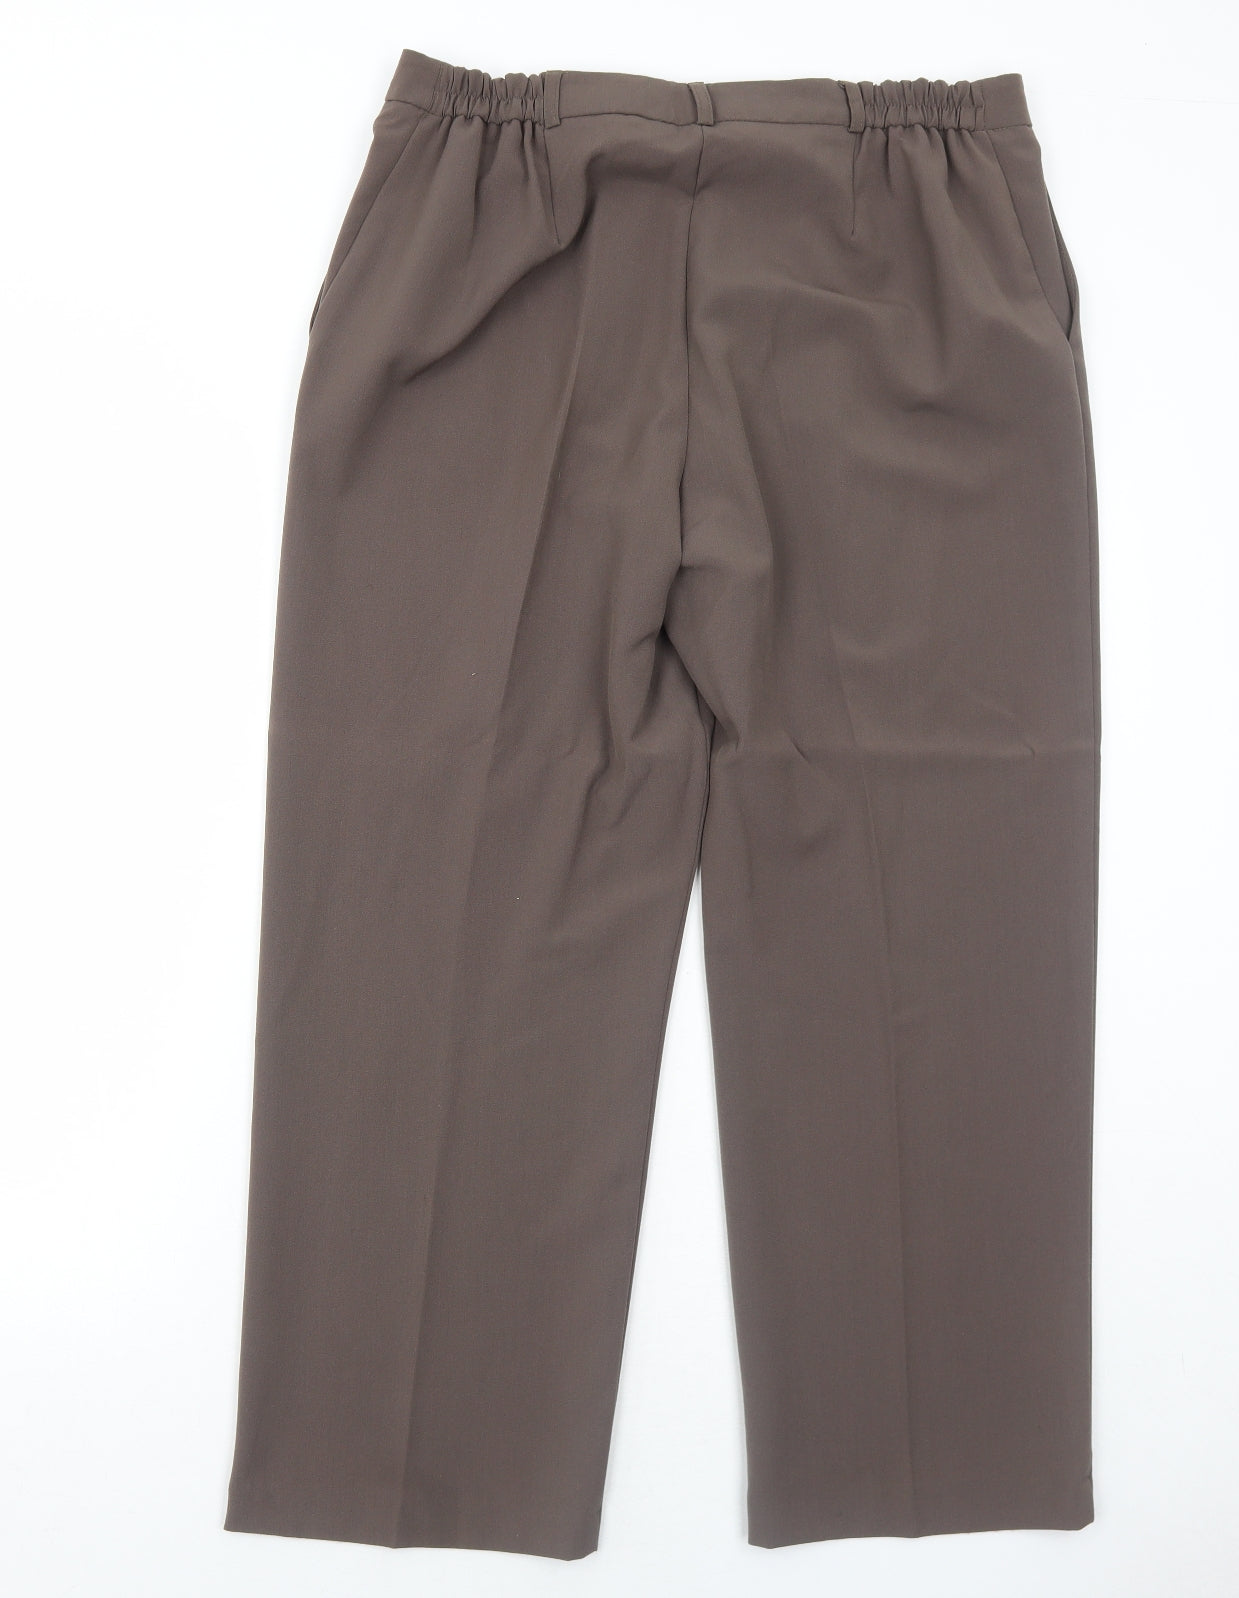 Essential Collection Womens Brown Polyester Trousers Size 16 Regular Zip